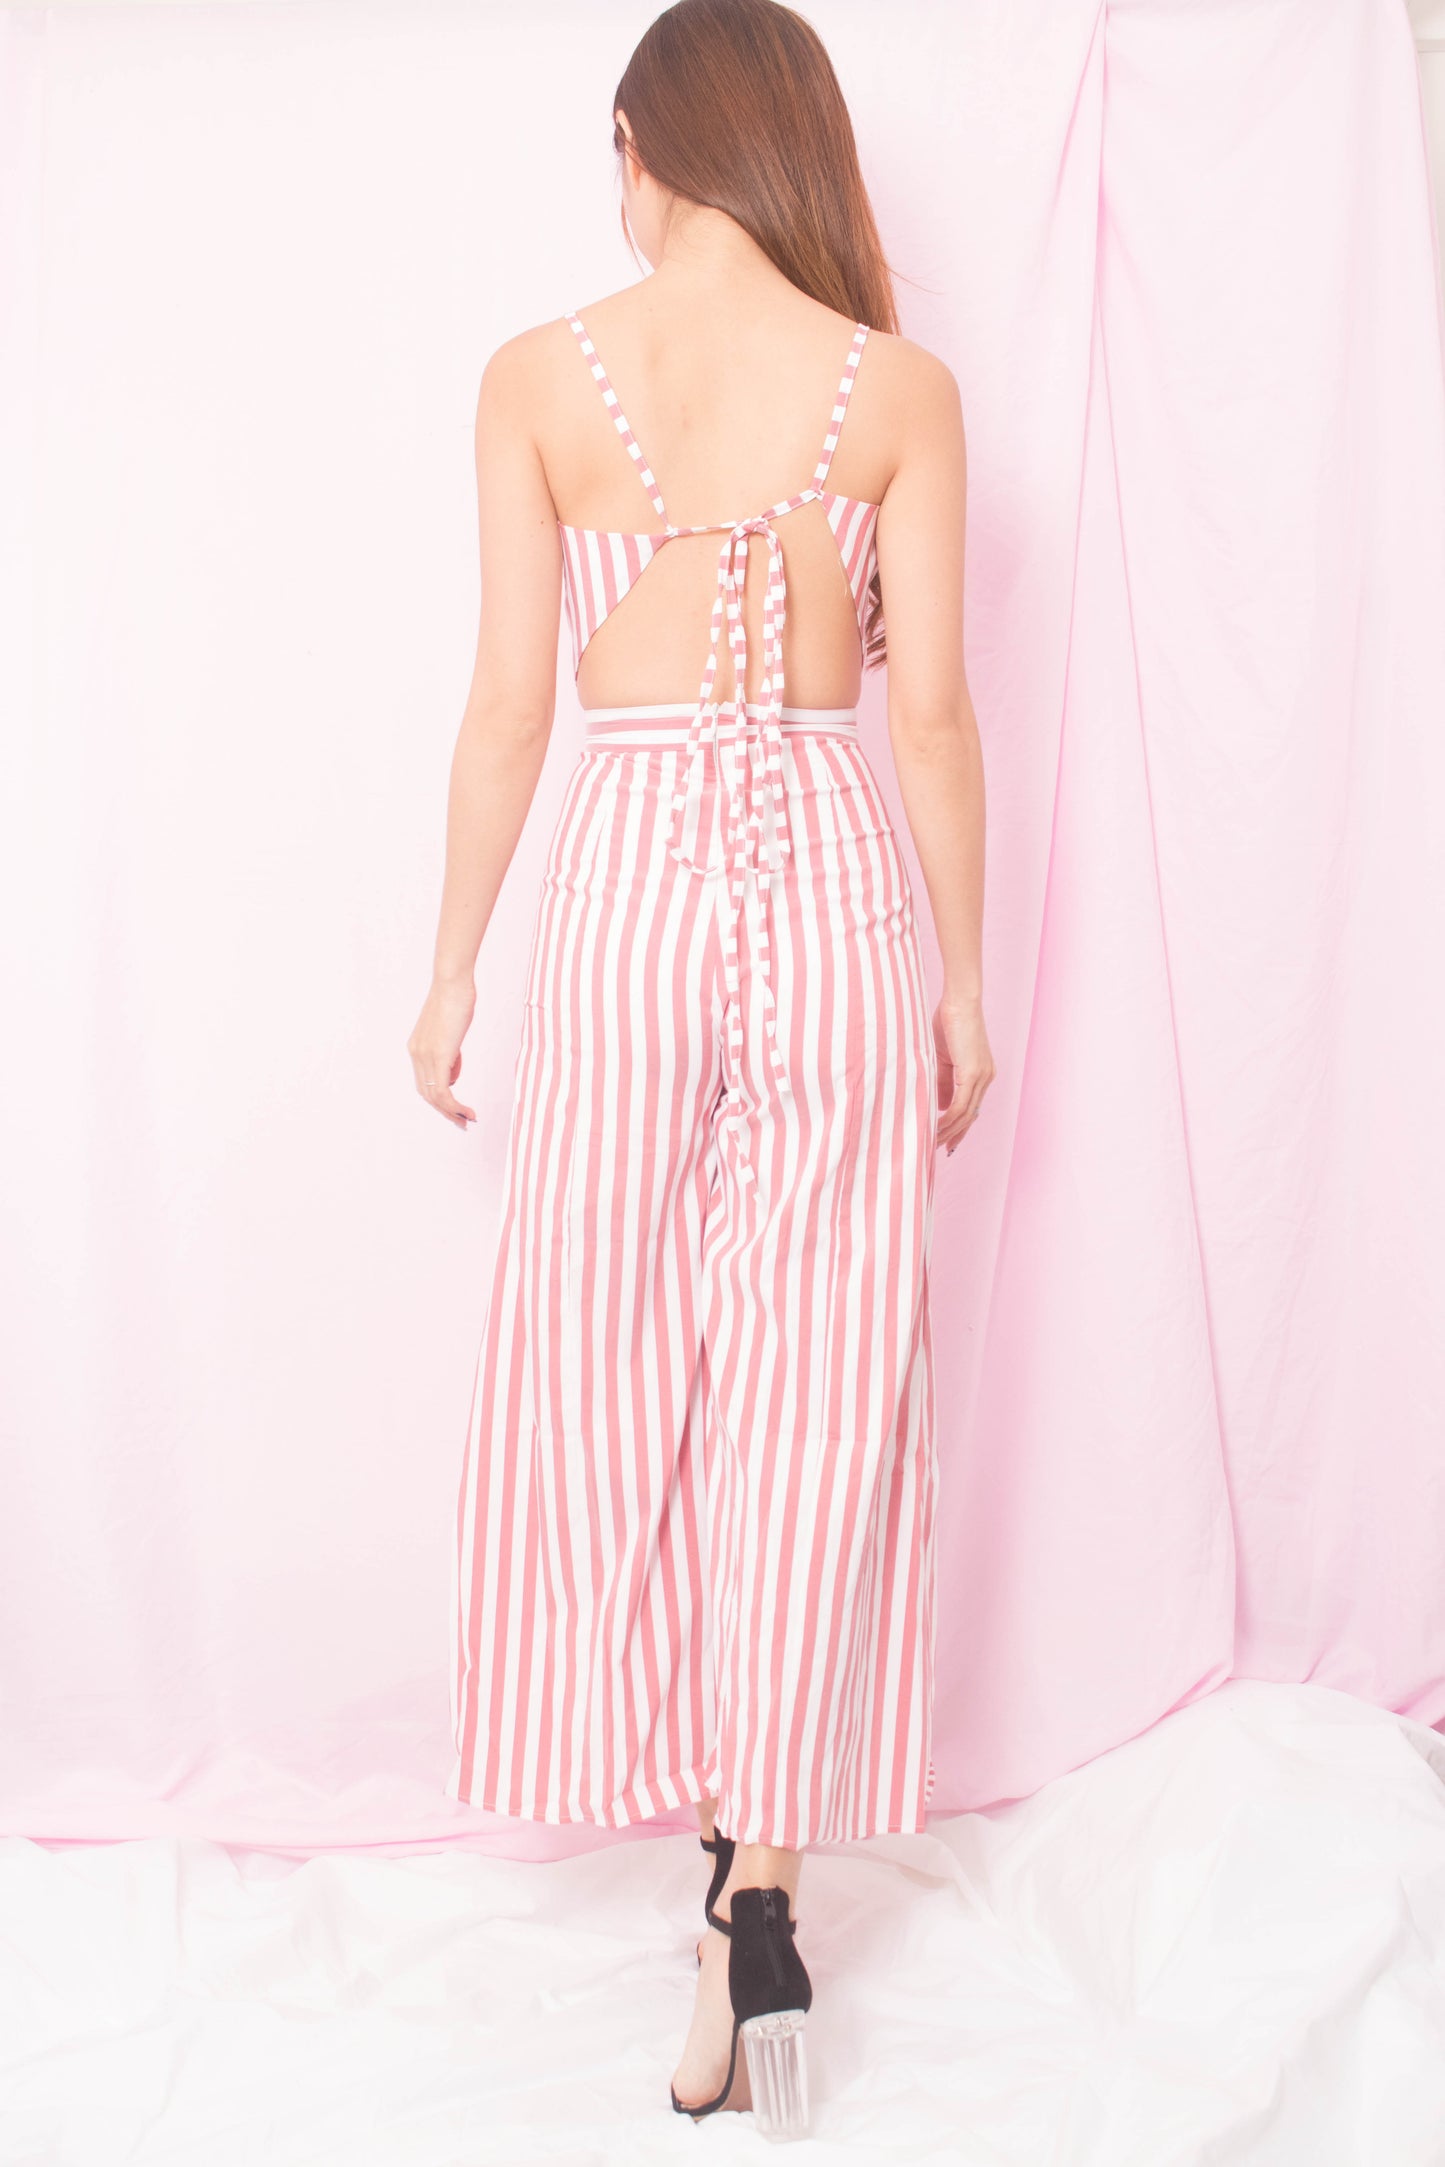 * PREMIUM* Ailia Stripes Jumpsuit in Redish Pink - SELF MANUFACTURED BY LBRLABEL